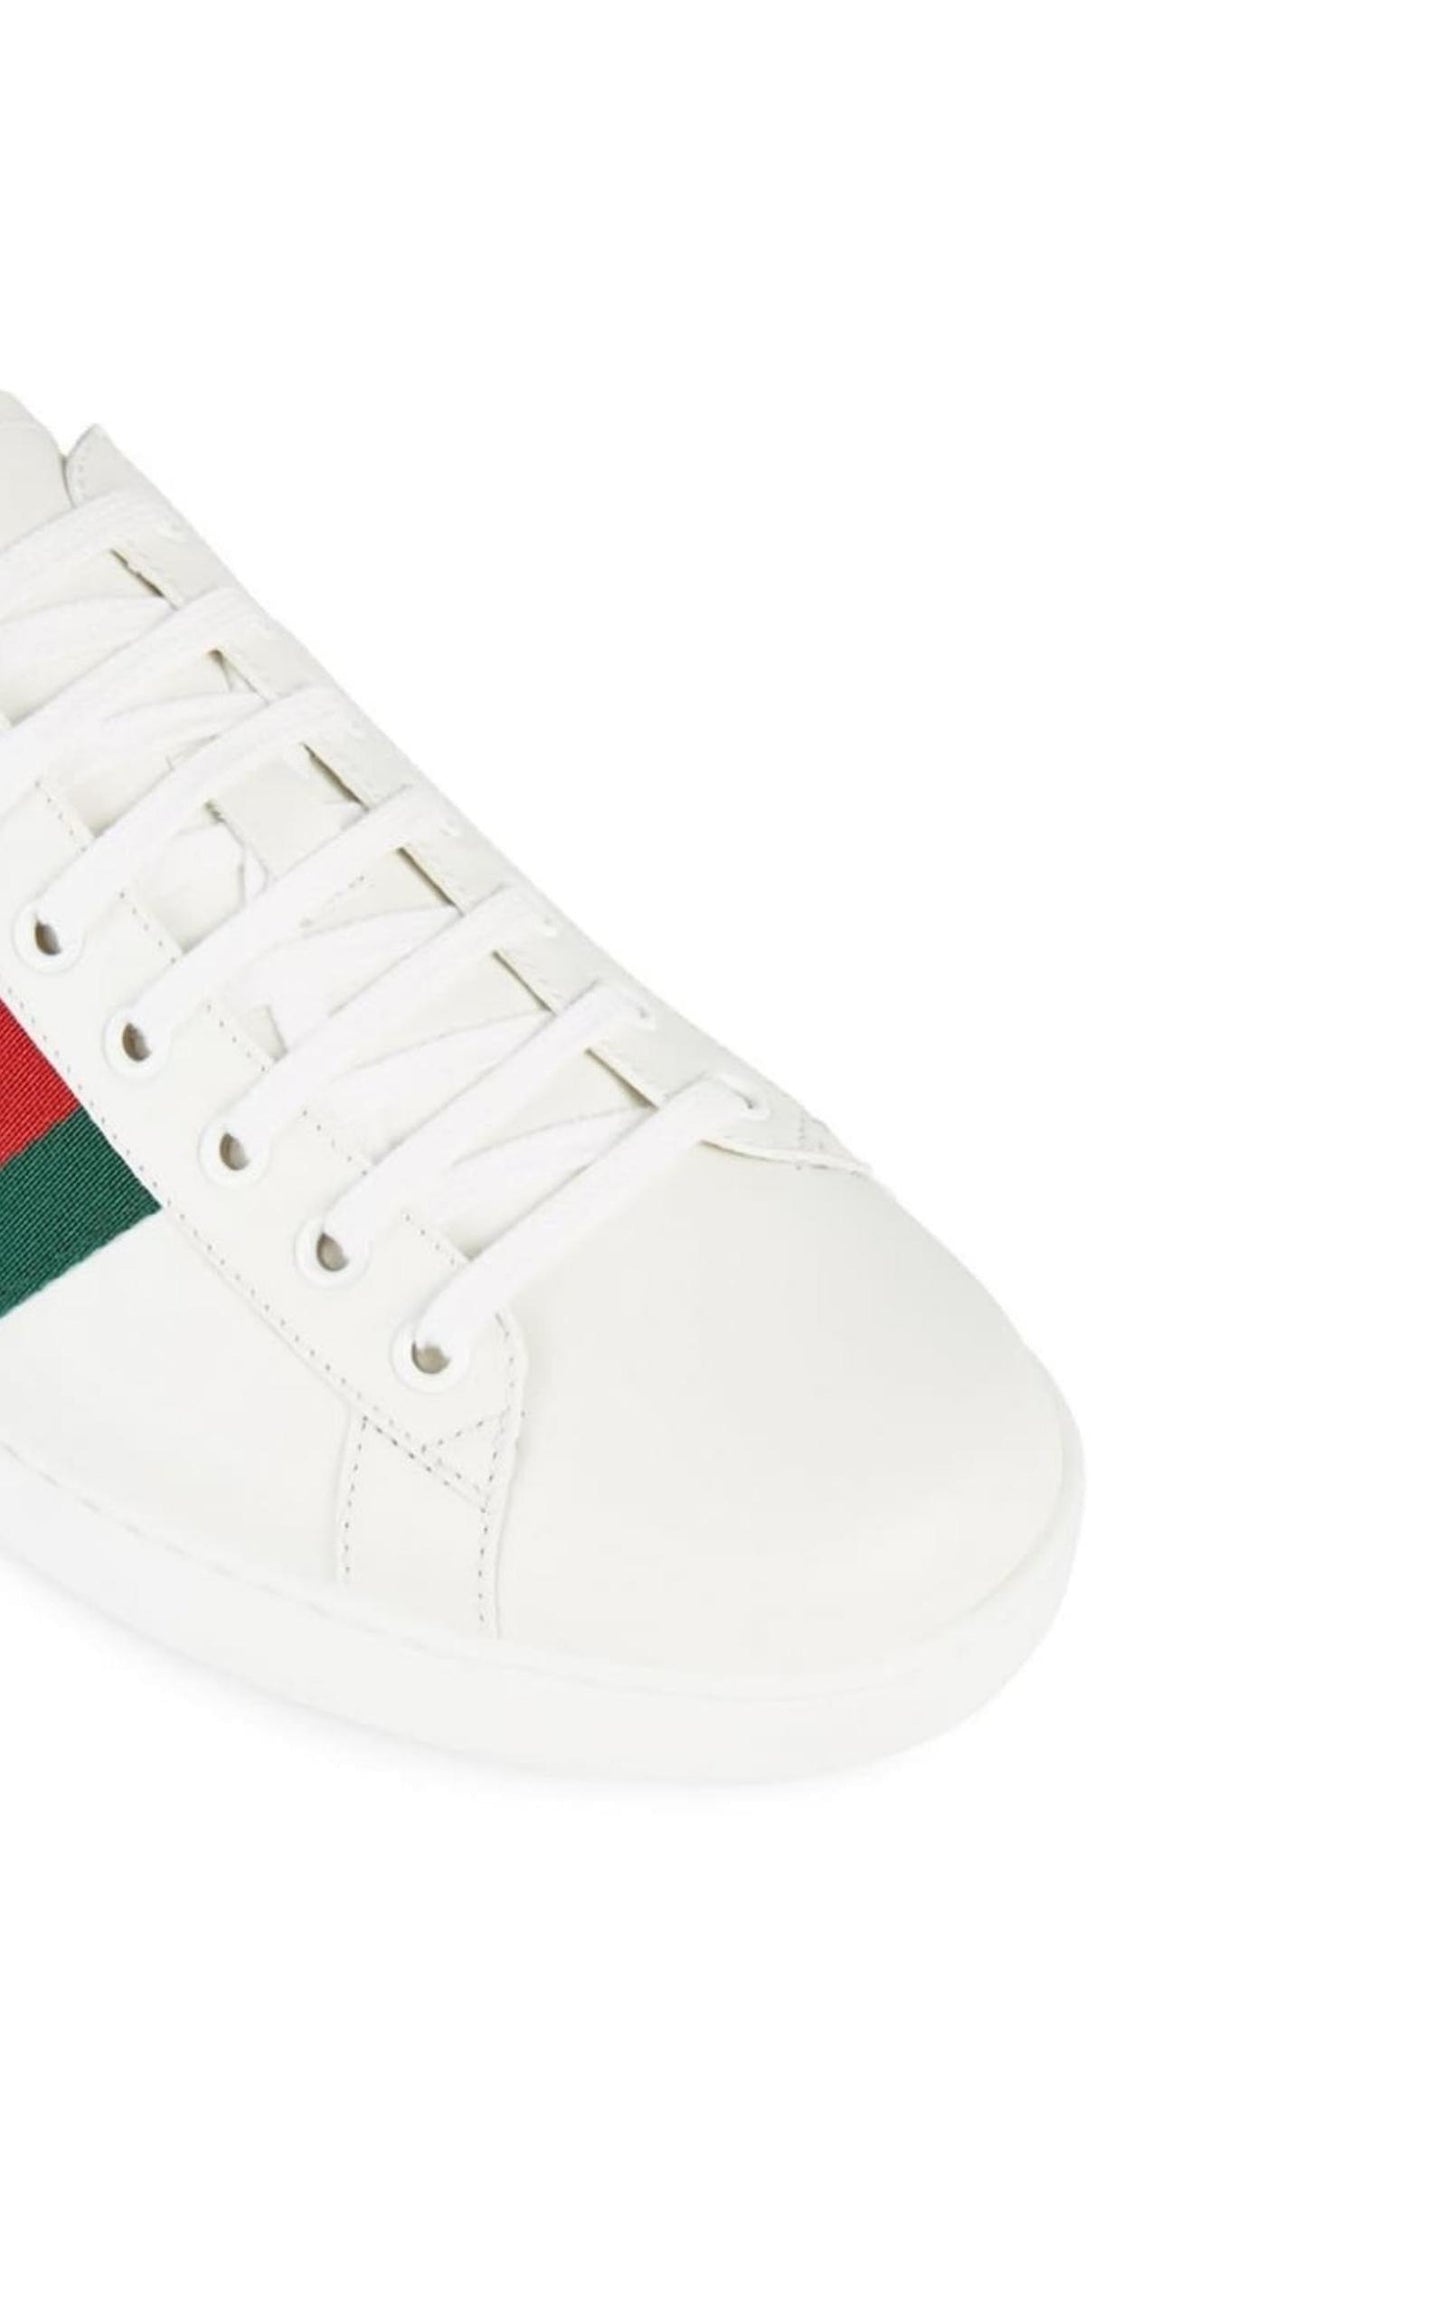  GucciAce Sneaker With GG Apple - Runway Catalog